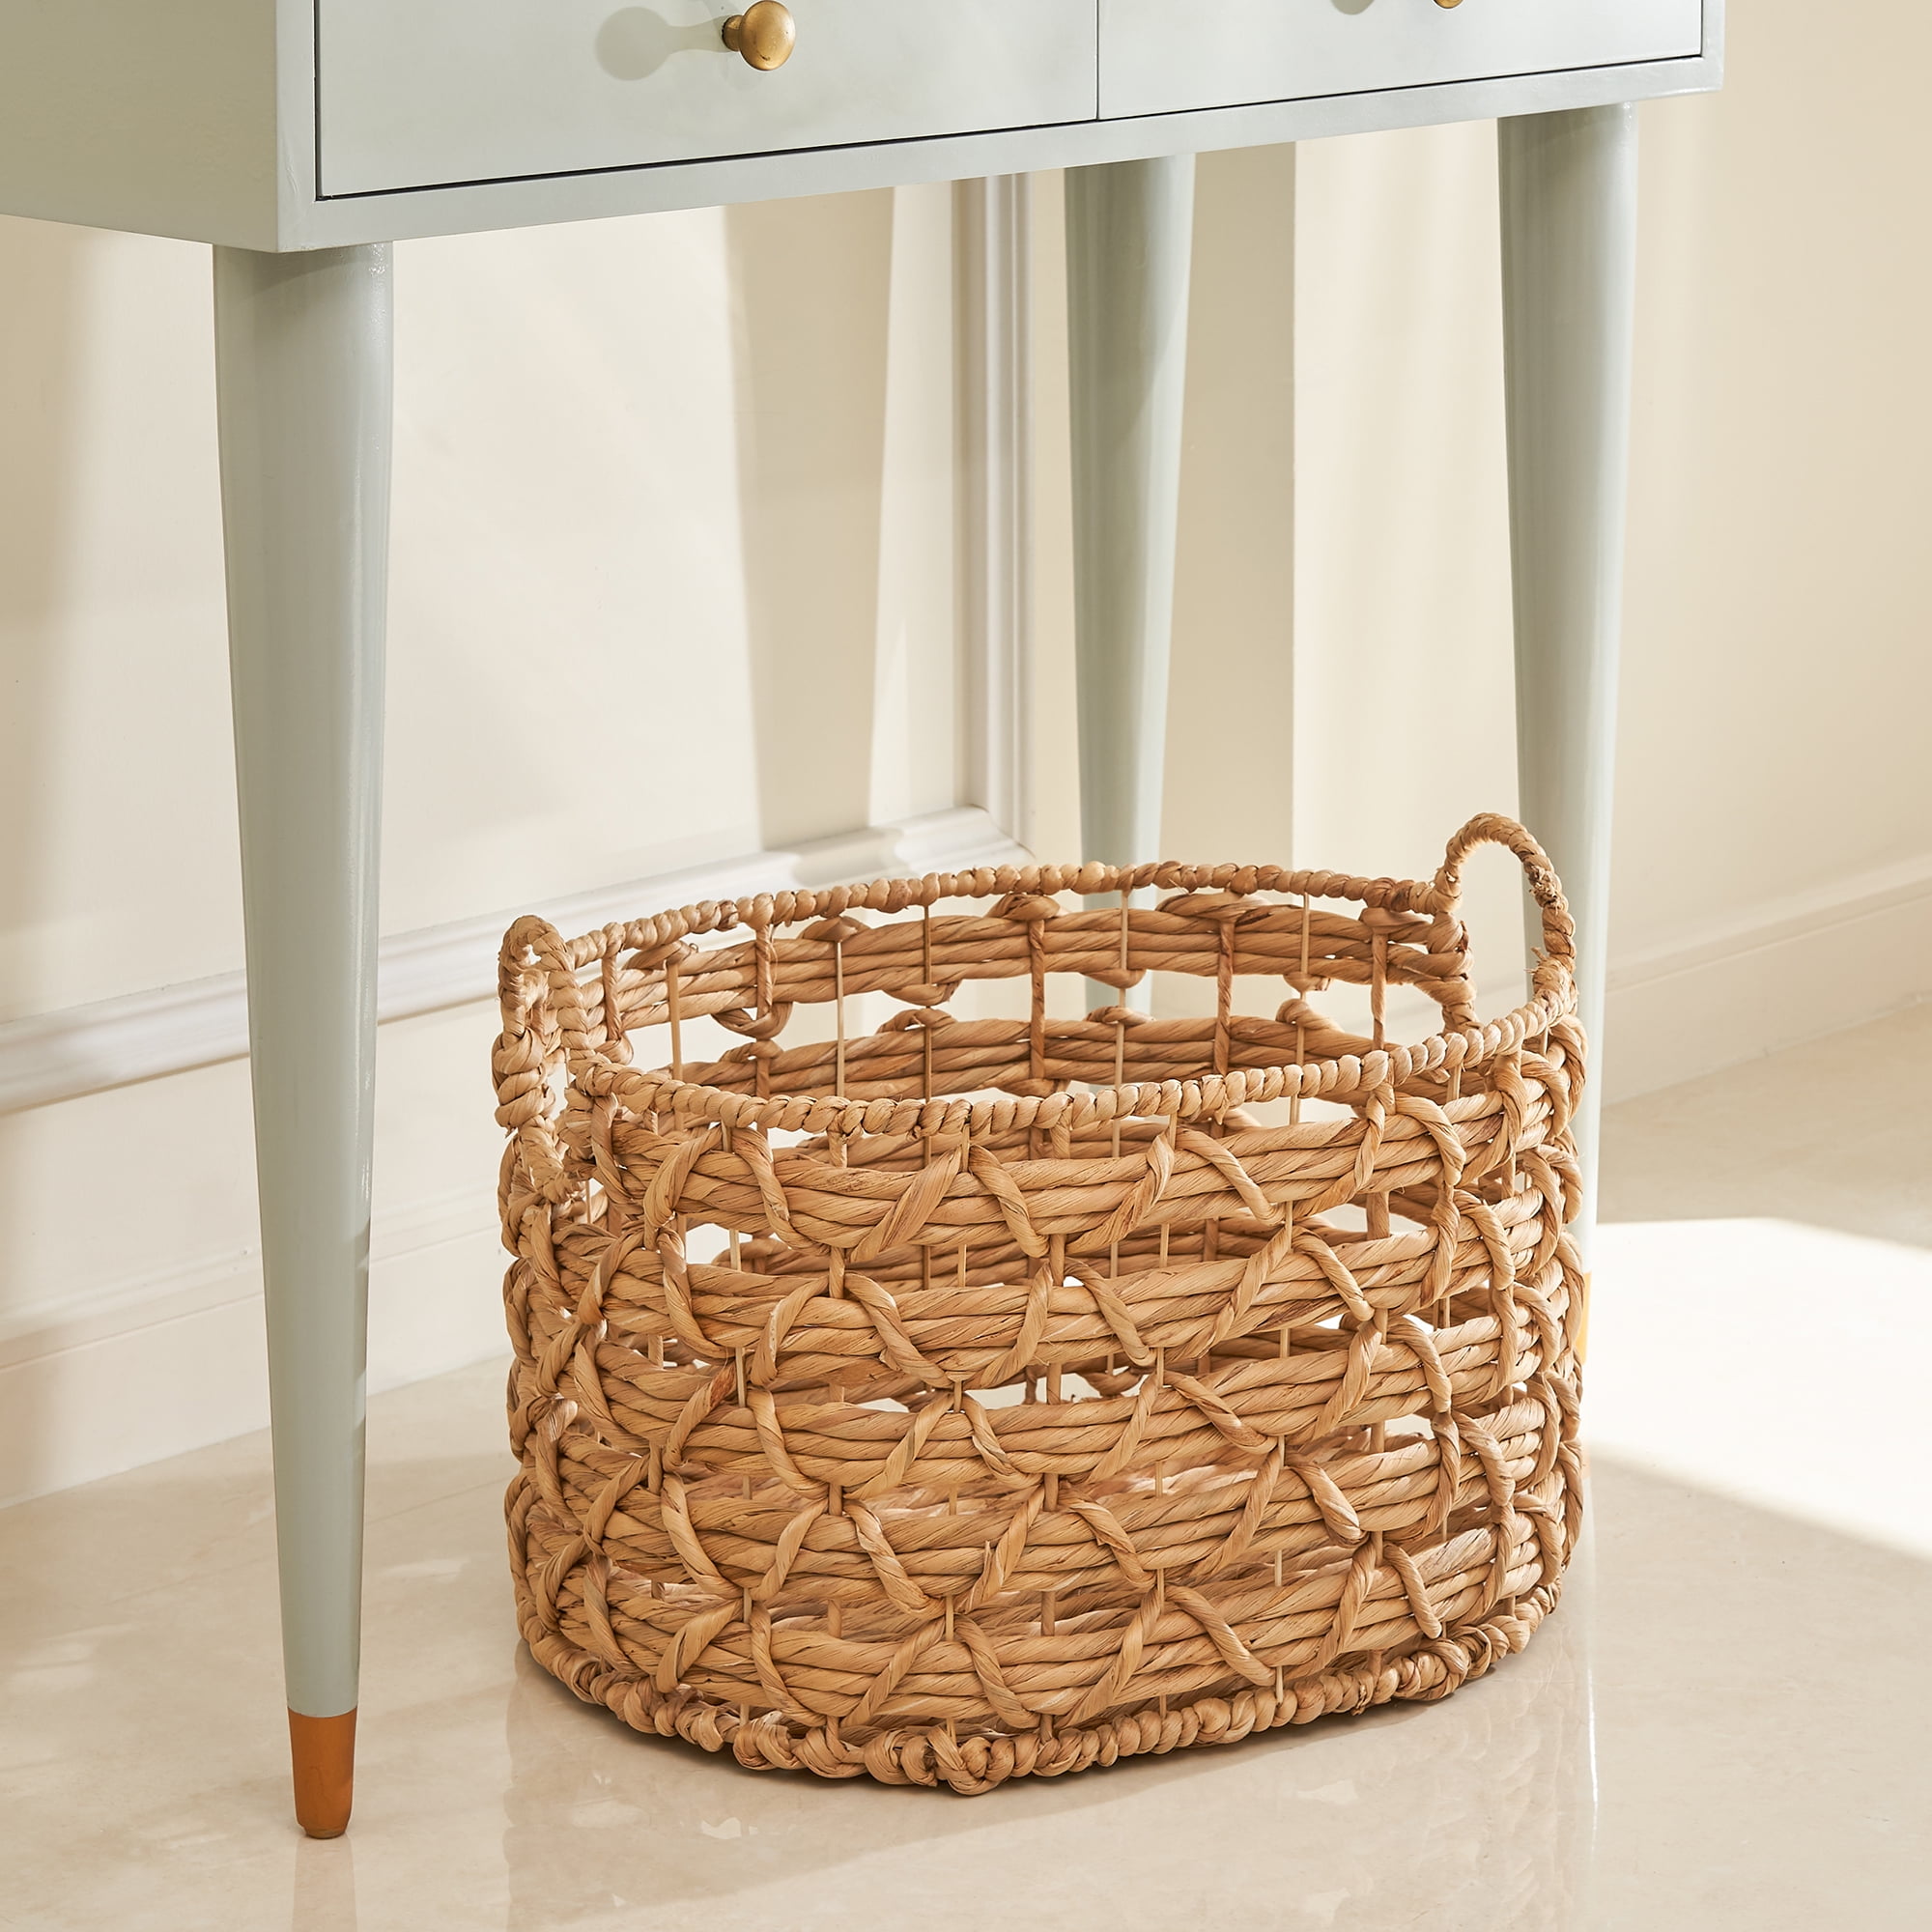 Camila 20-Inch Oval Hand-woven Water Hyacinth Storage and Laundry Basket - Size L